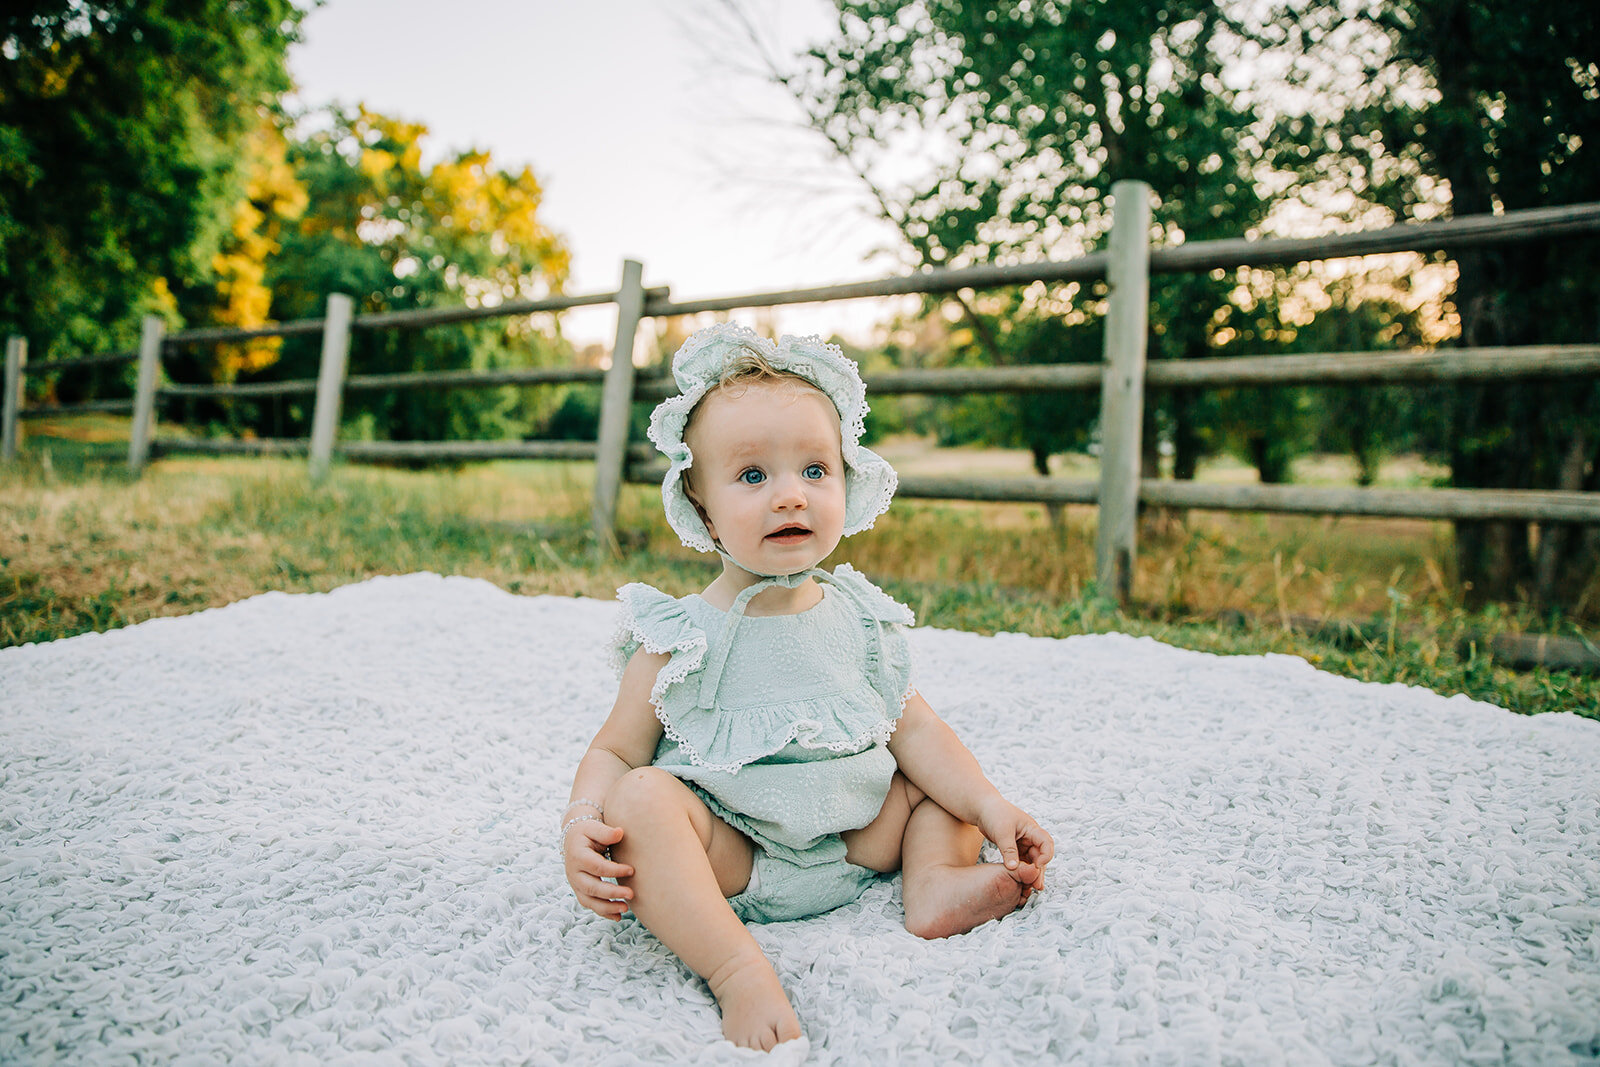  birthday photos first birthday kids photography cute baby outfits for girls playing with toes keeping kids attention baby hats girls fashion inspo baby photoshoot posing inspo sitting on a blanket posing ideas baby wearing bonnet Denzil Stewart park